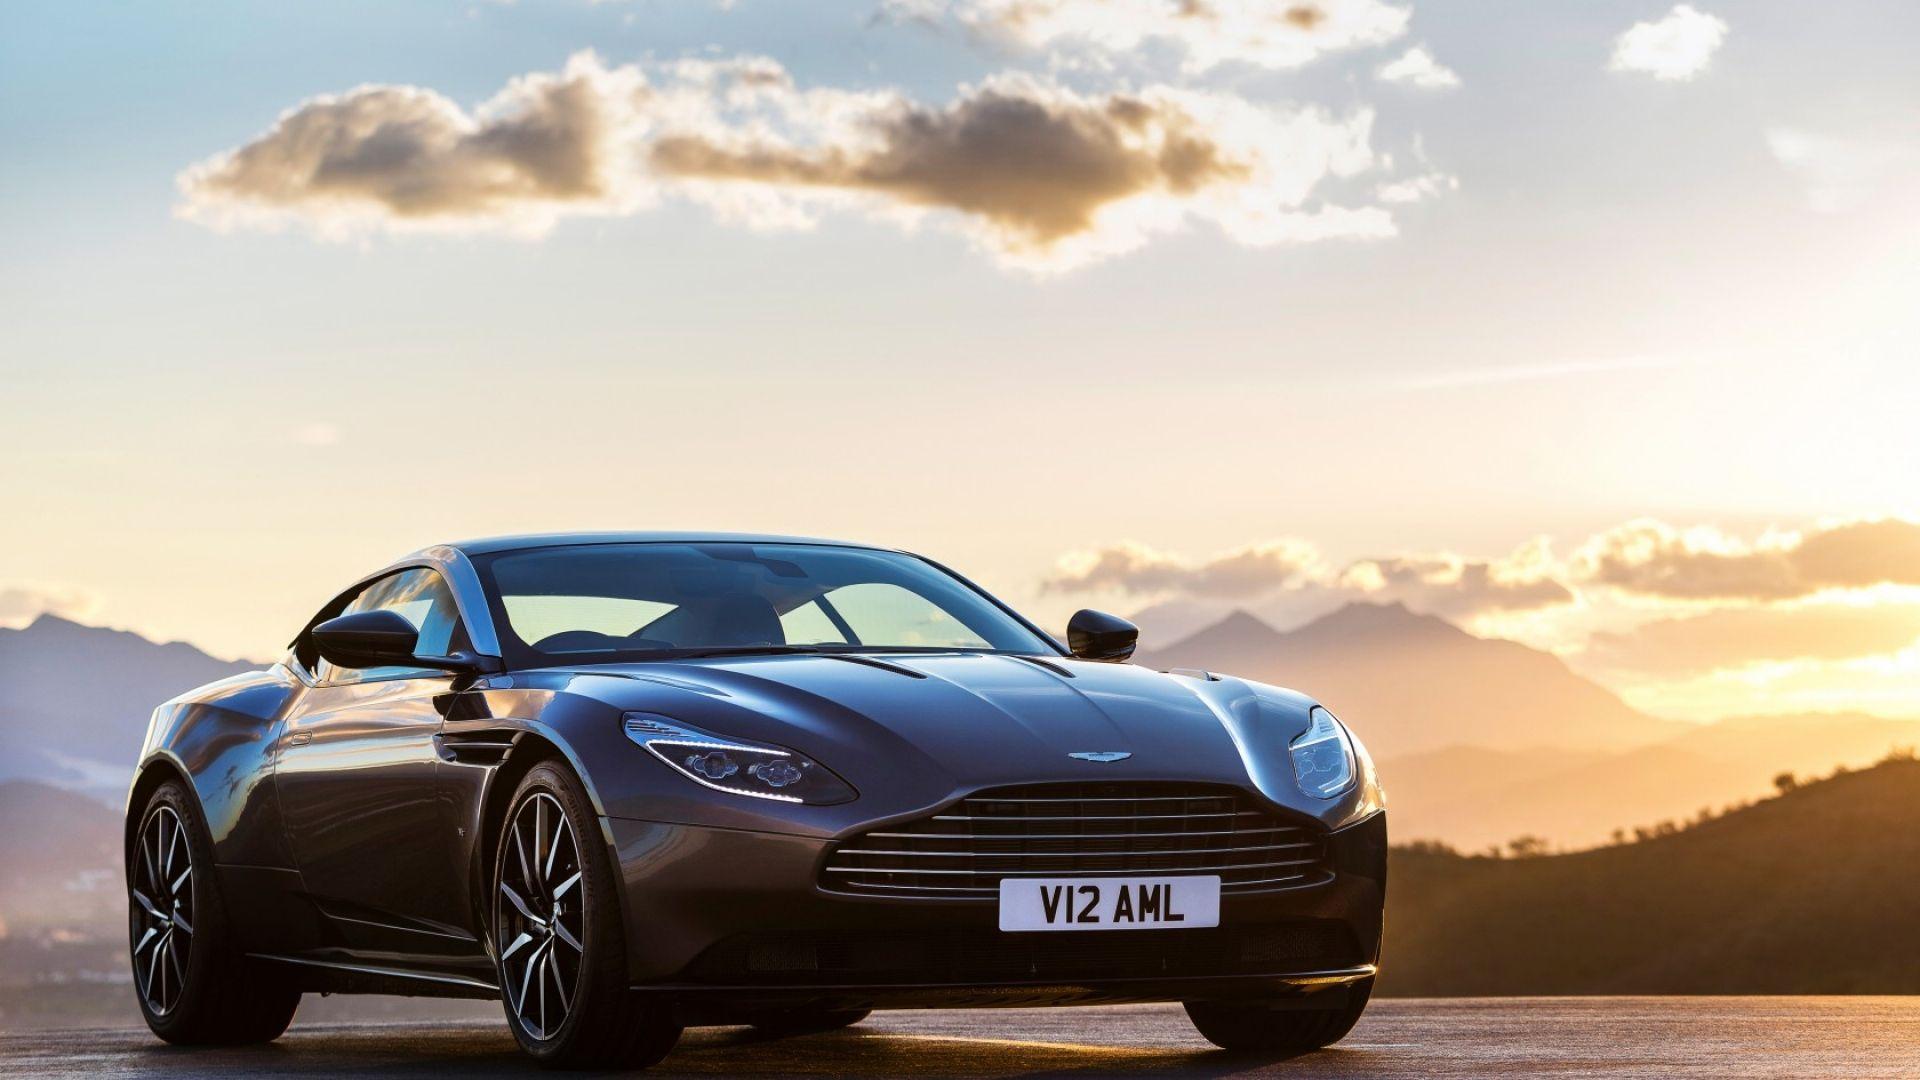 Download Wallpapers 1920x1080 Aston martin, Db11, Side view Full HD